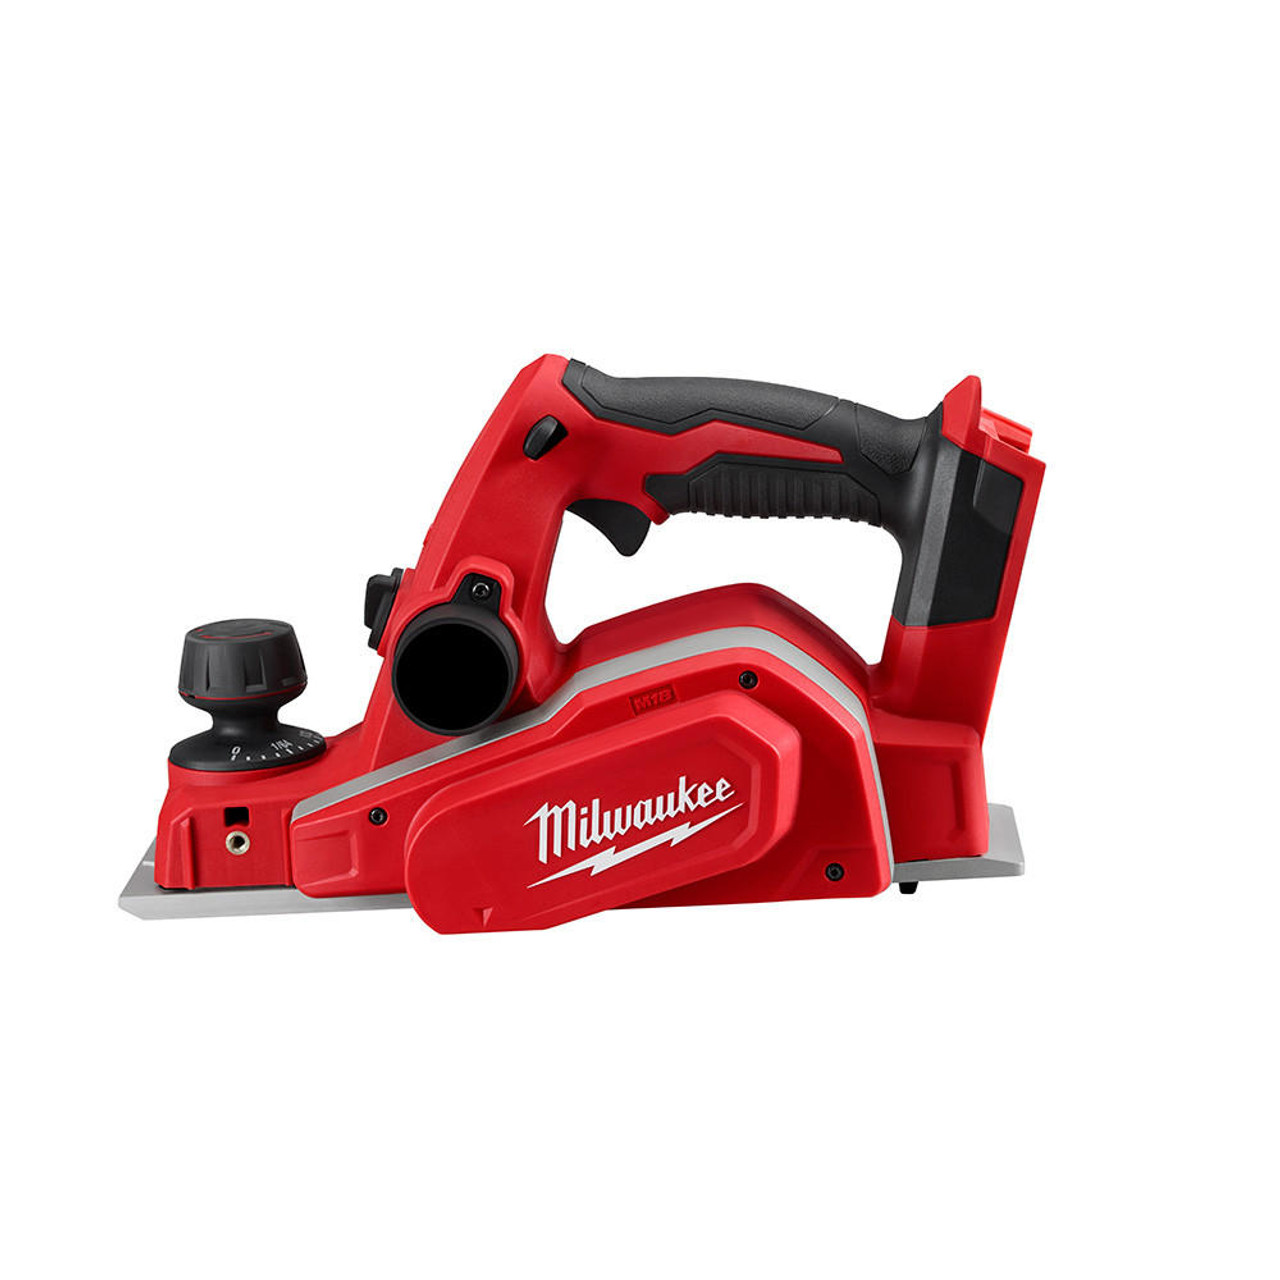  Milwaukee M18 3-1/4" Planer (Tool Only)2623-20 